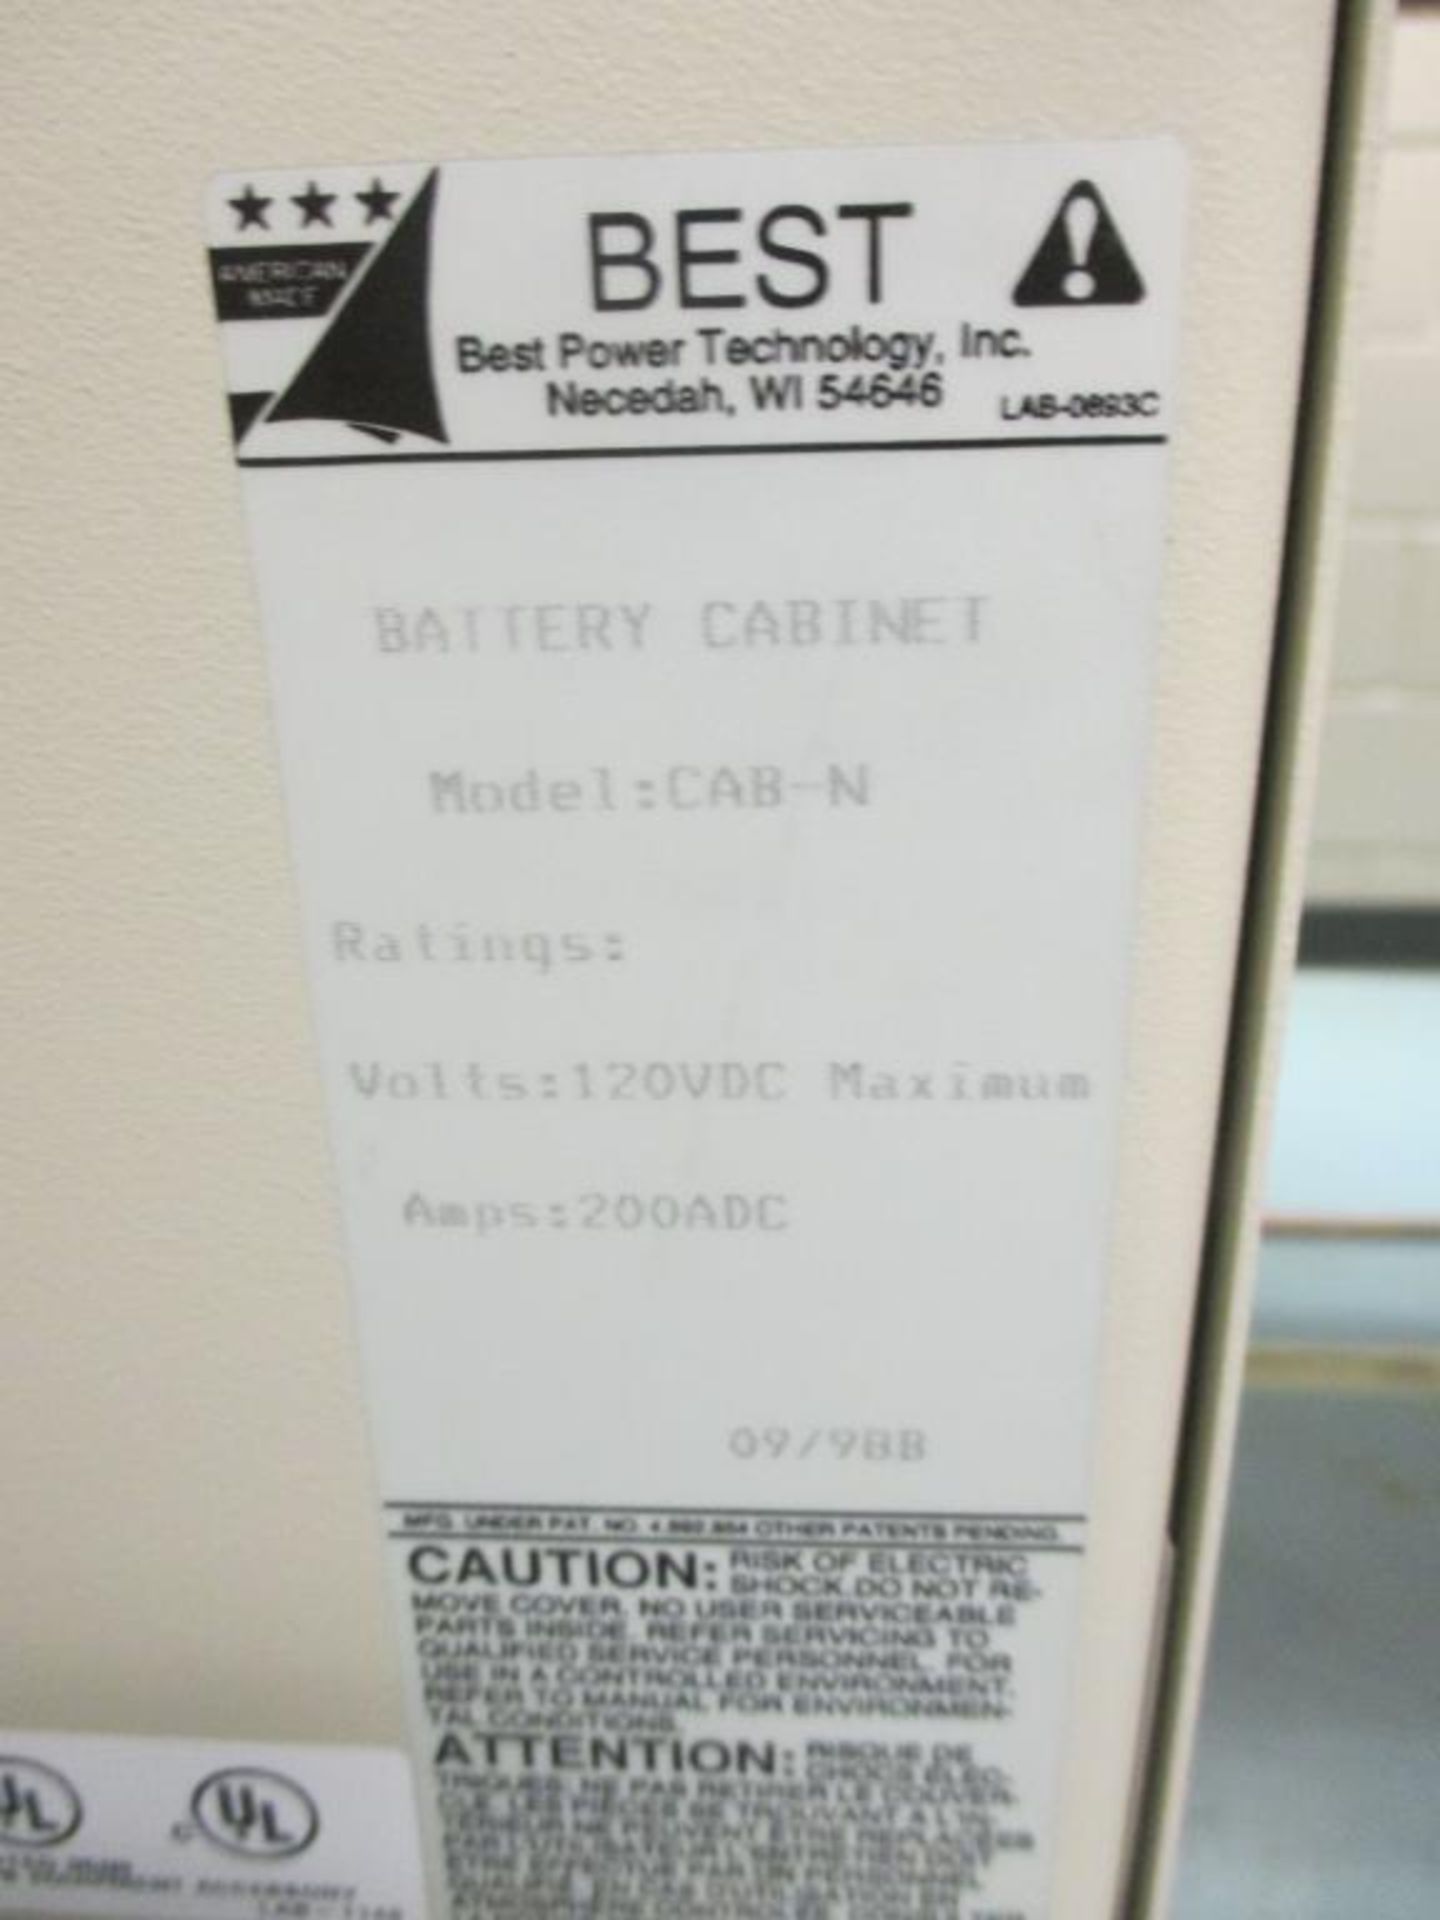 Best Power Battery Cabinet - Image 3 of 3